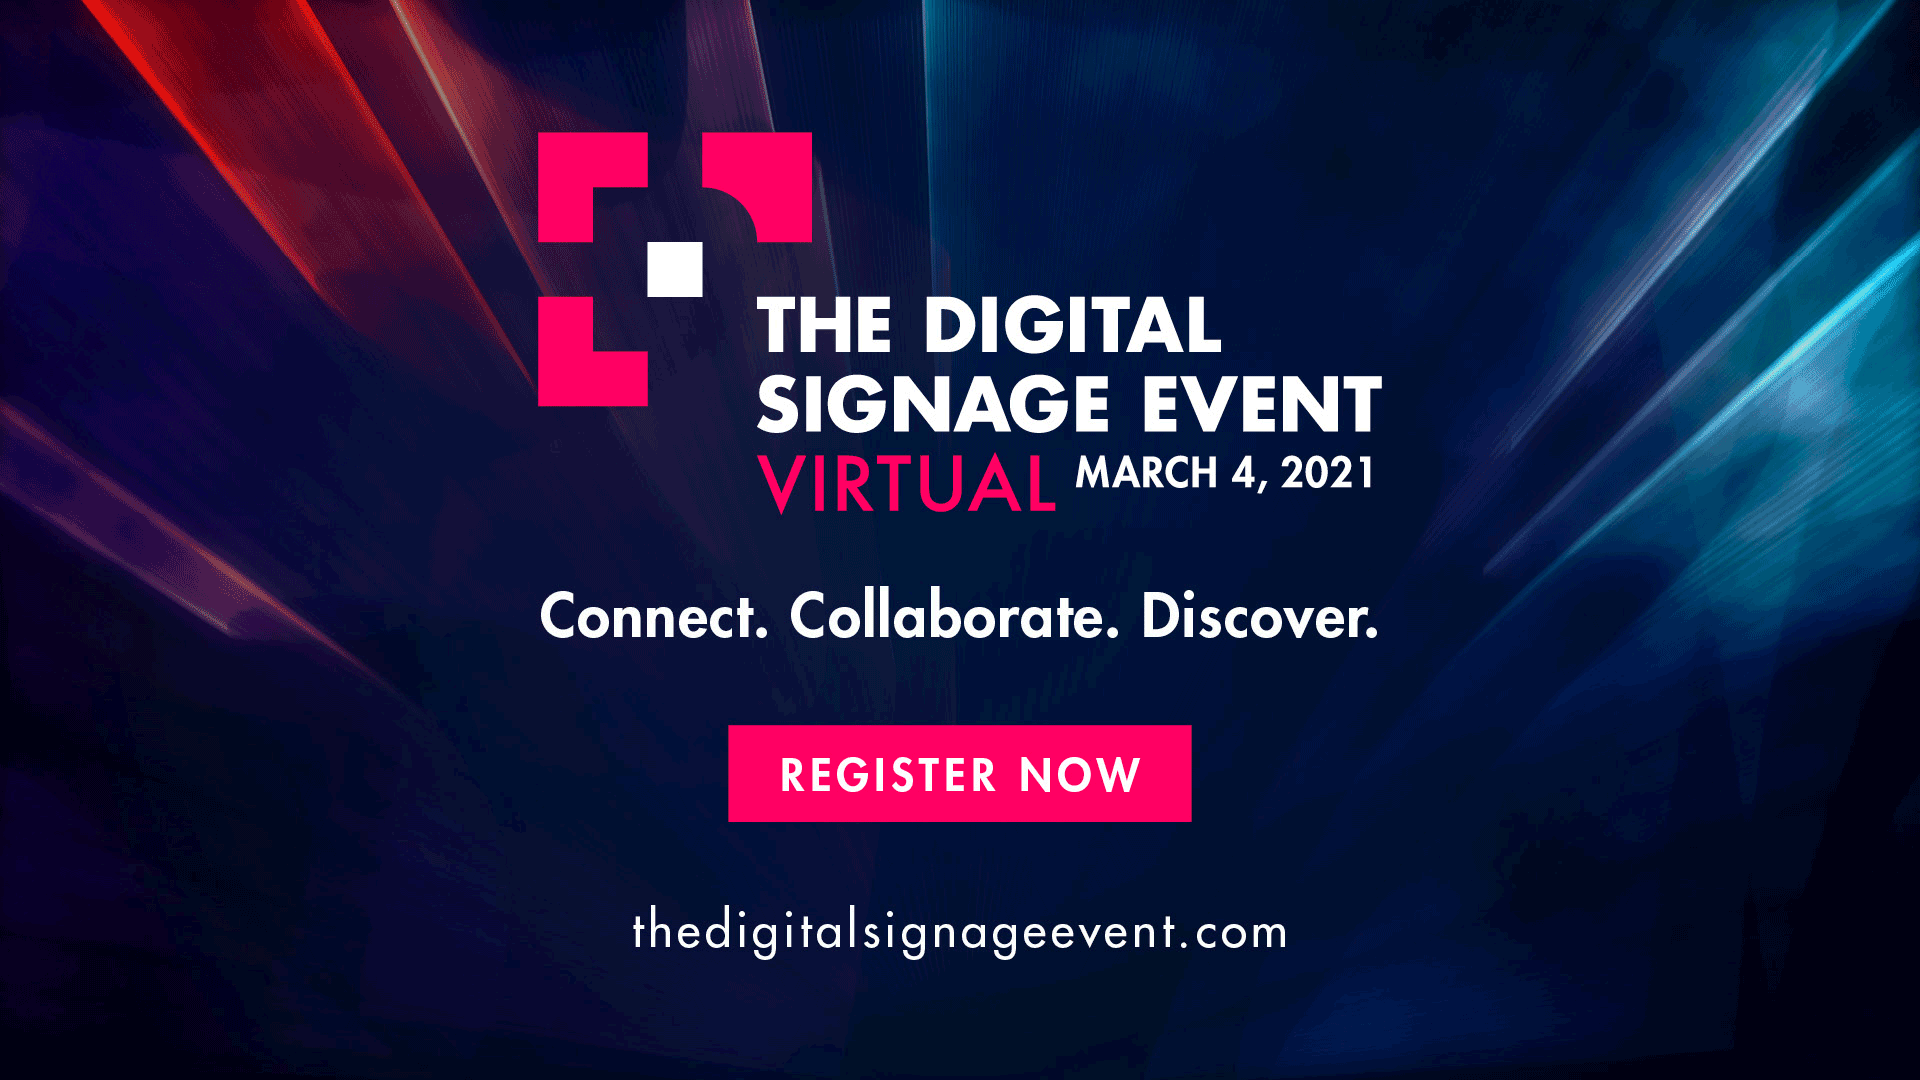 The Digital Signage Event March 4, 2021